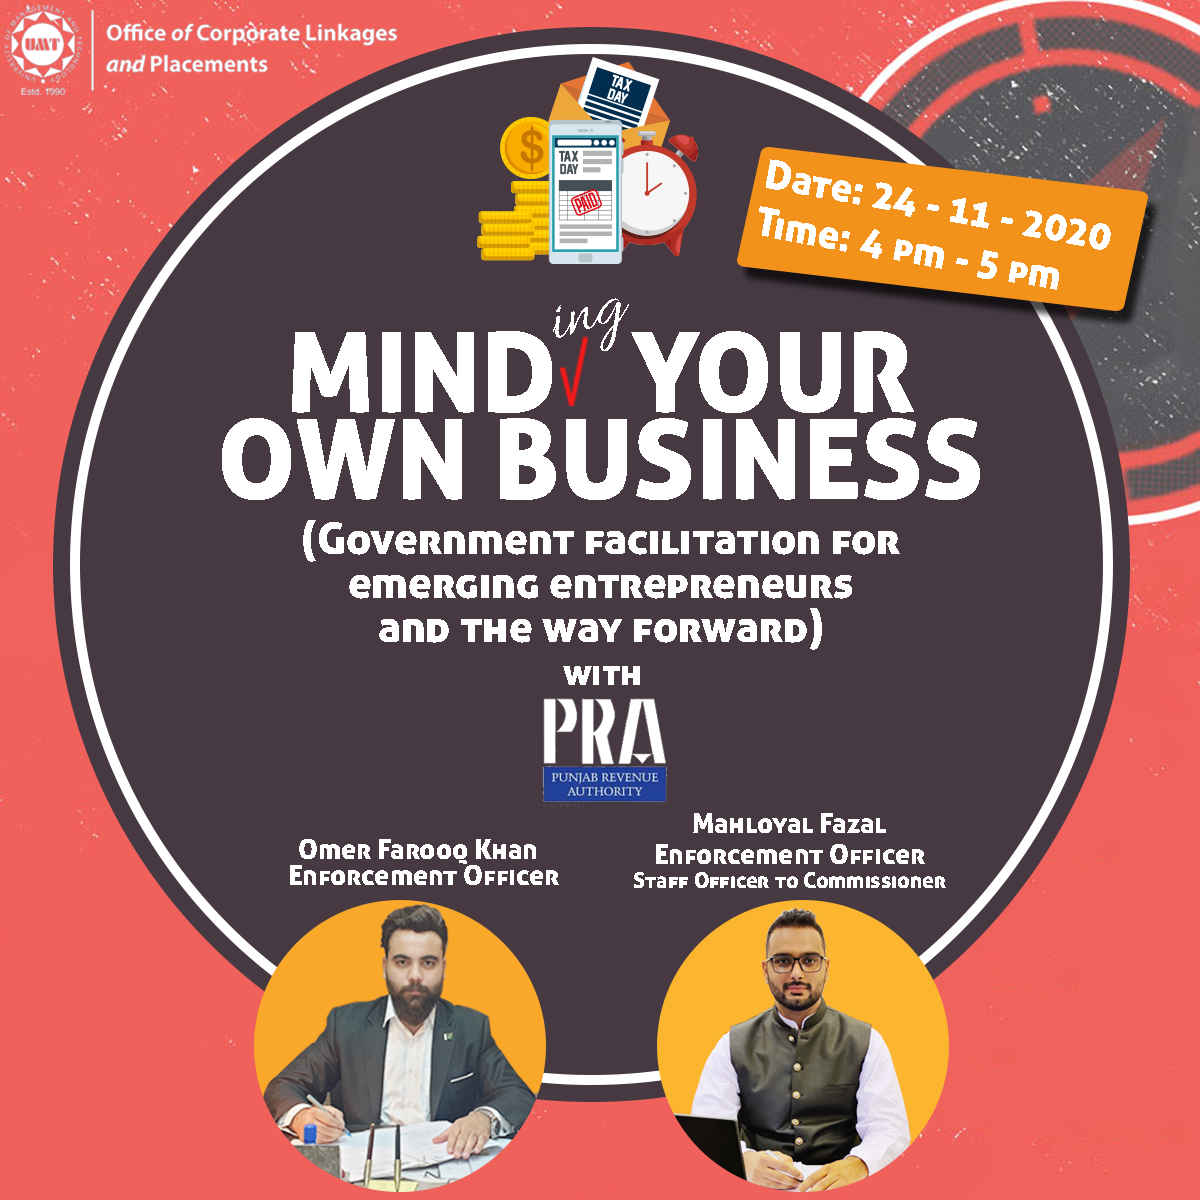 Mind-ing You Own Business - Government Facilitation for Emerging Entrepreneurs & the Way Forward